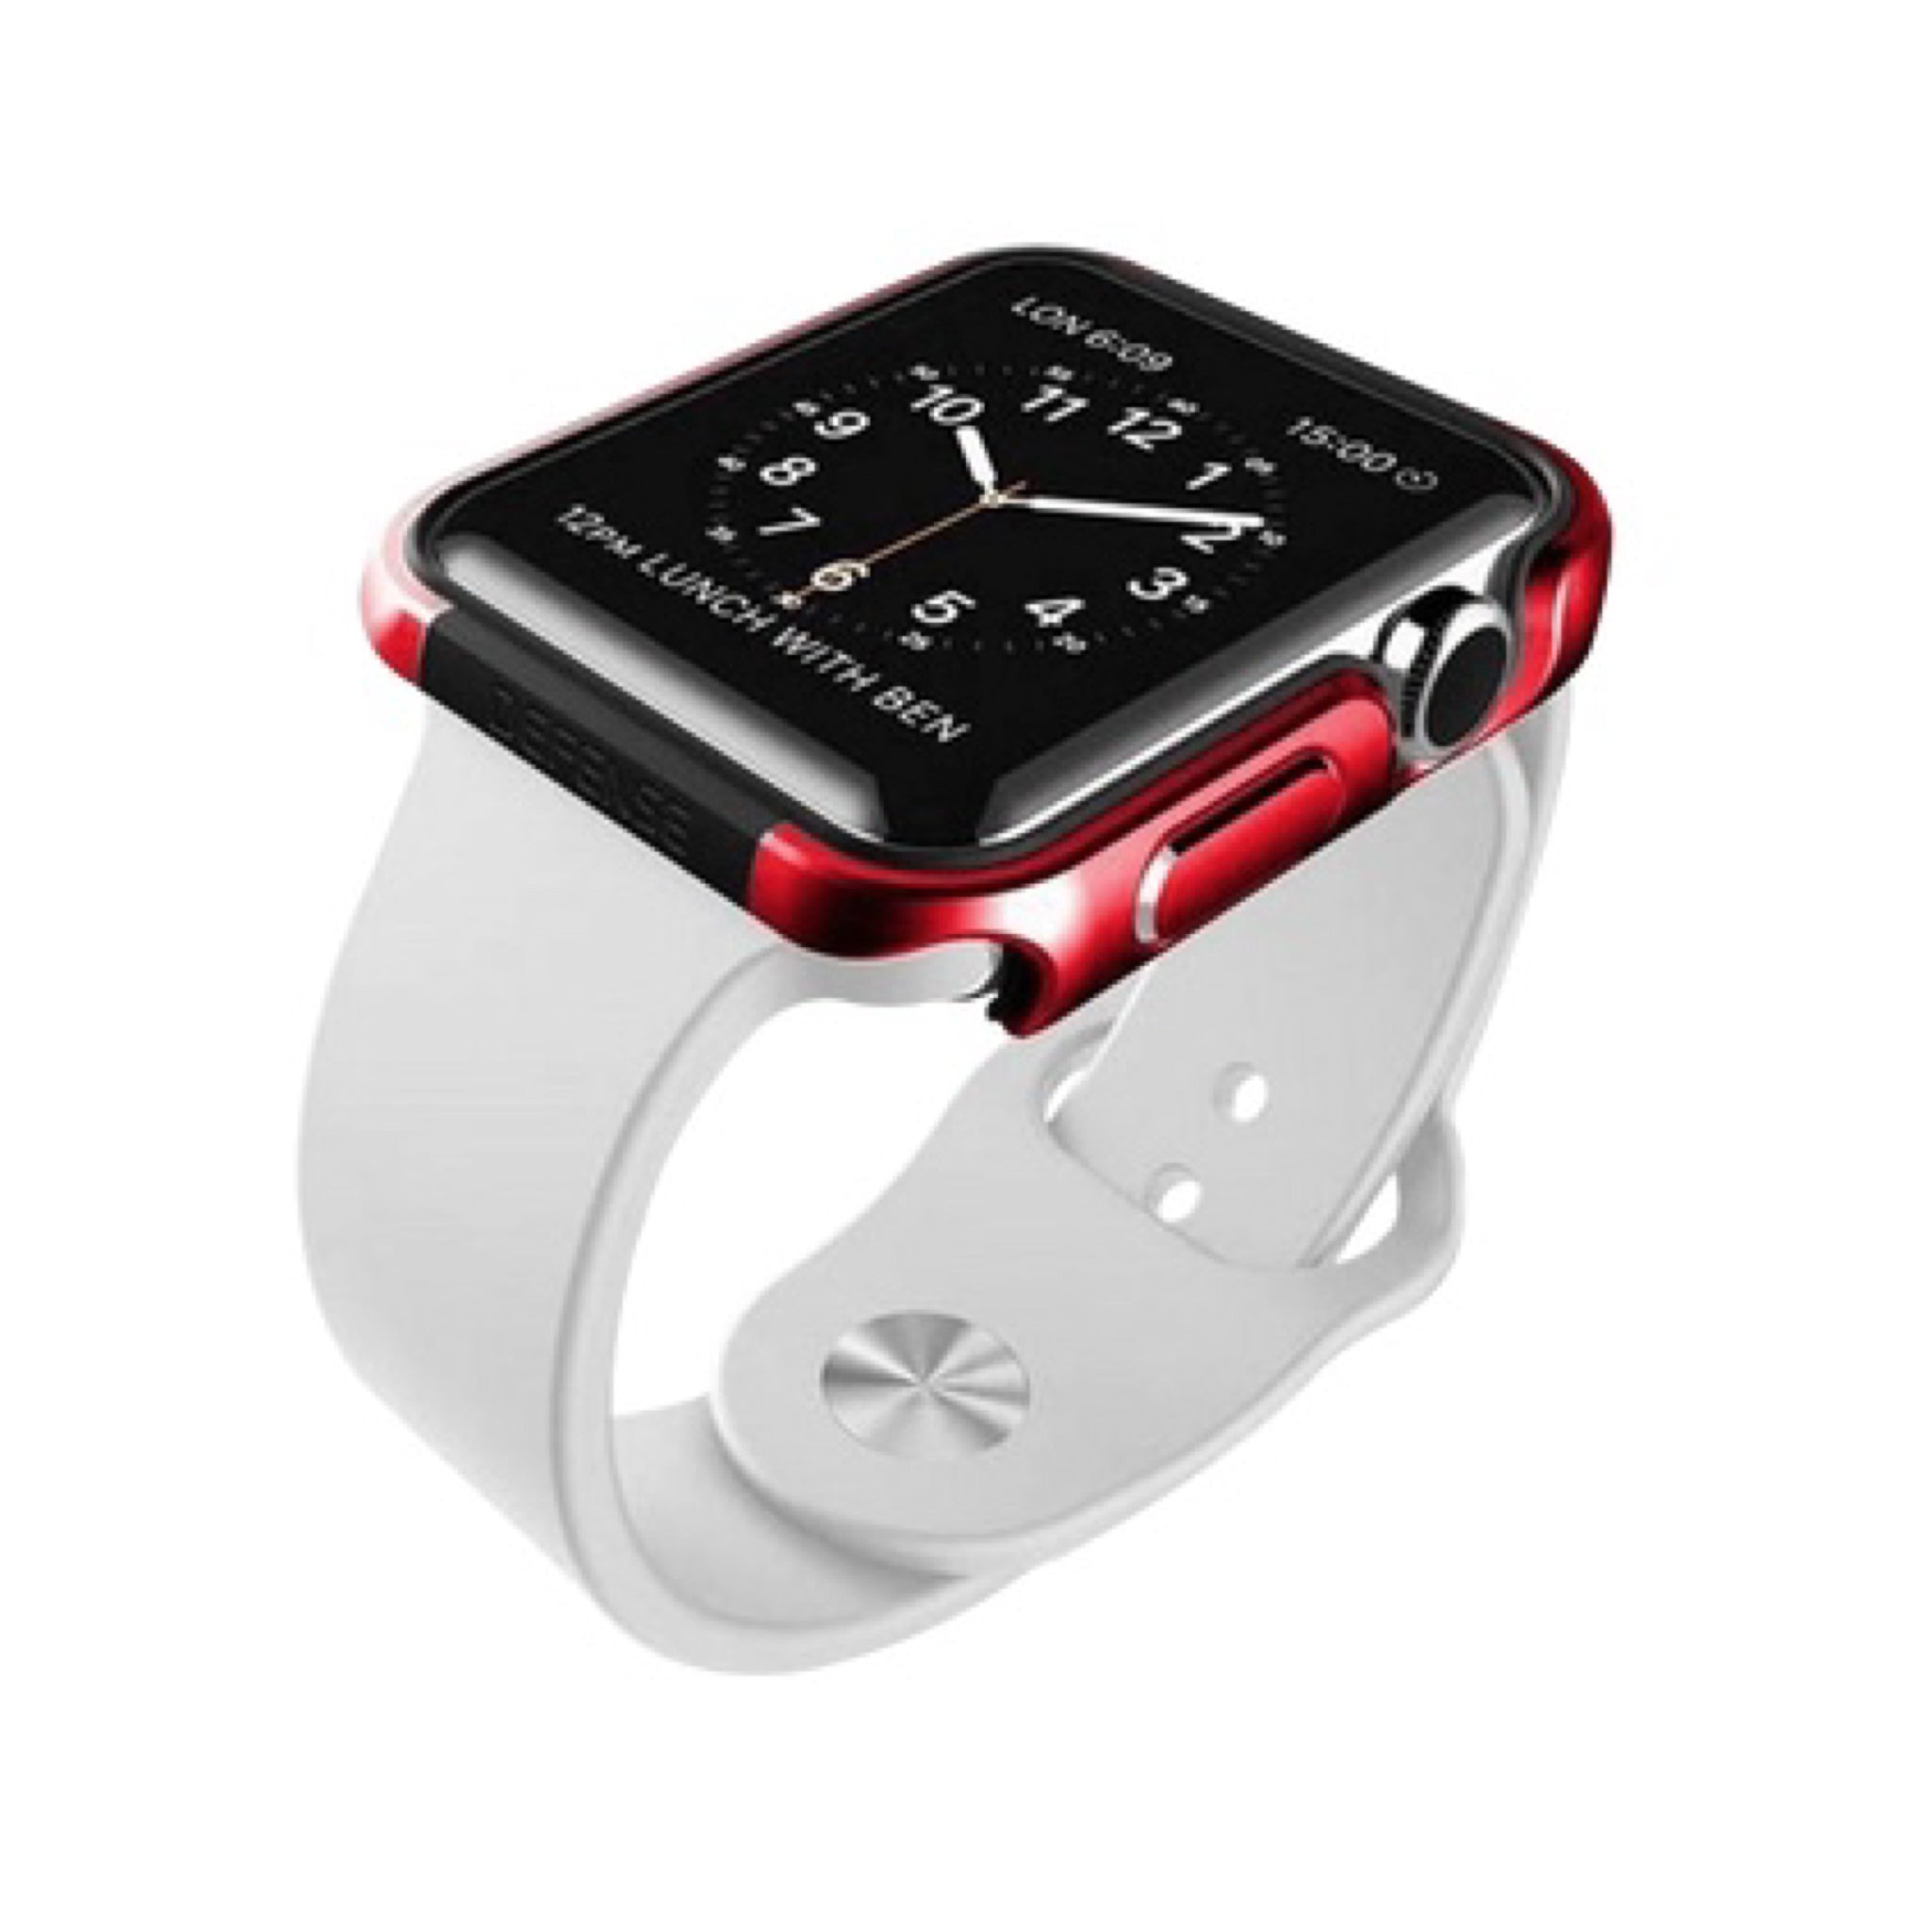 https://caserace.net/products/x-doria-defense-edge-case-for-apple-watch-42mm-red